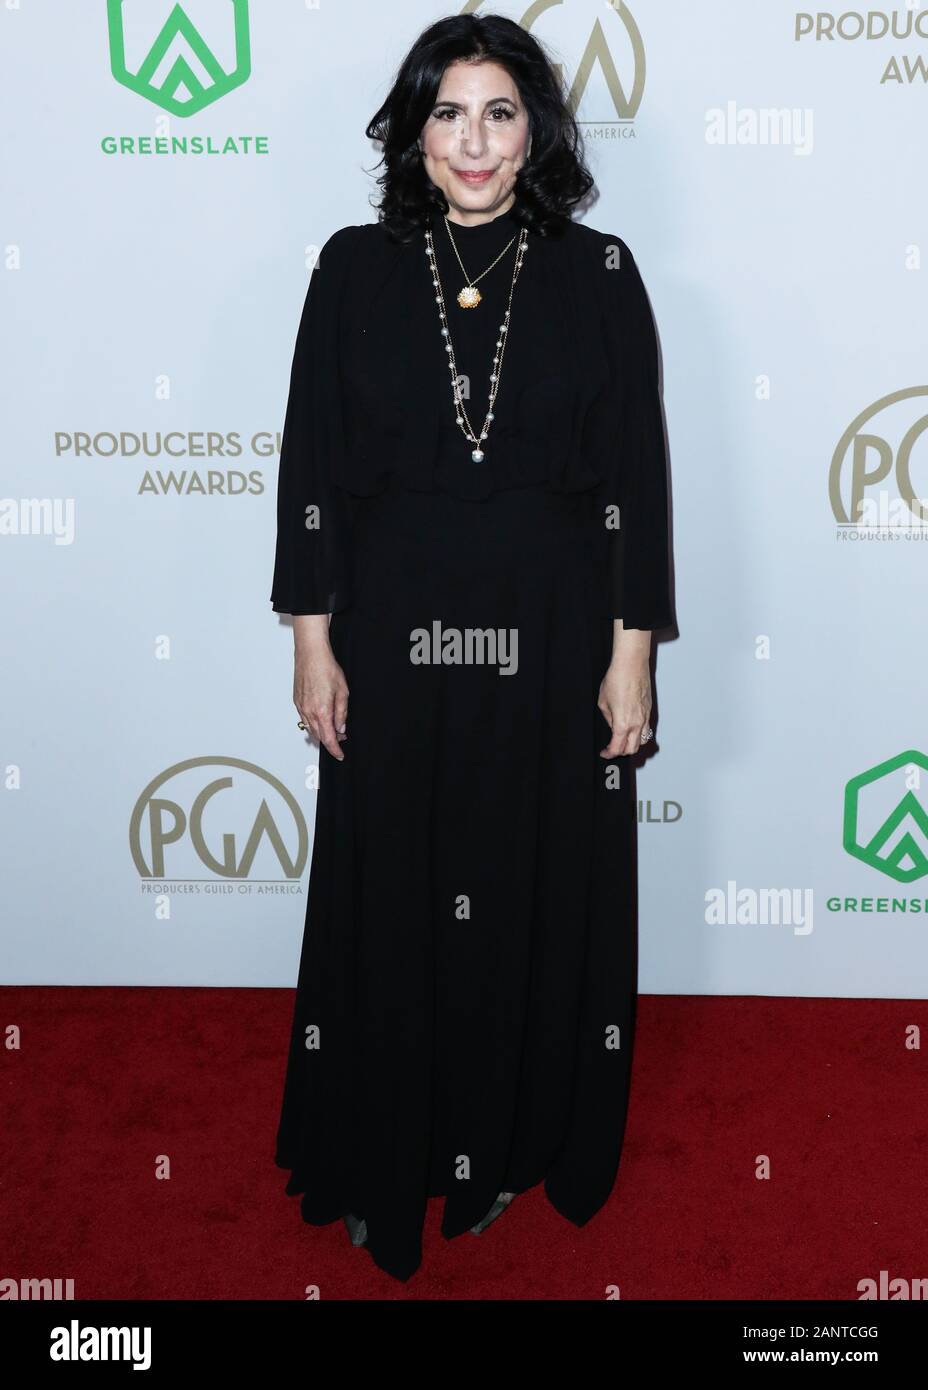 Hollywood, USA. 18th Jan, 2020. Producer Sue Kroll arrives at the 31st Annual Producers Guild Awards held at the Hollywood Palladium on January 18, 2020 in Hollywood, Los Angeles, California, United States. Credit: Image Press Agency/Alamy Live News Stock Photo